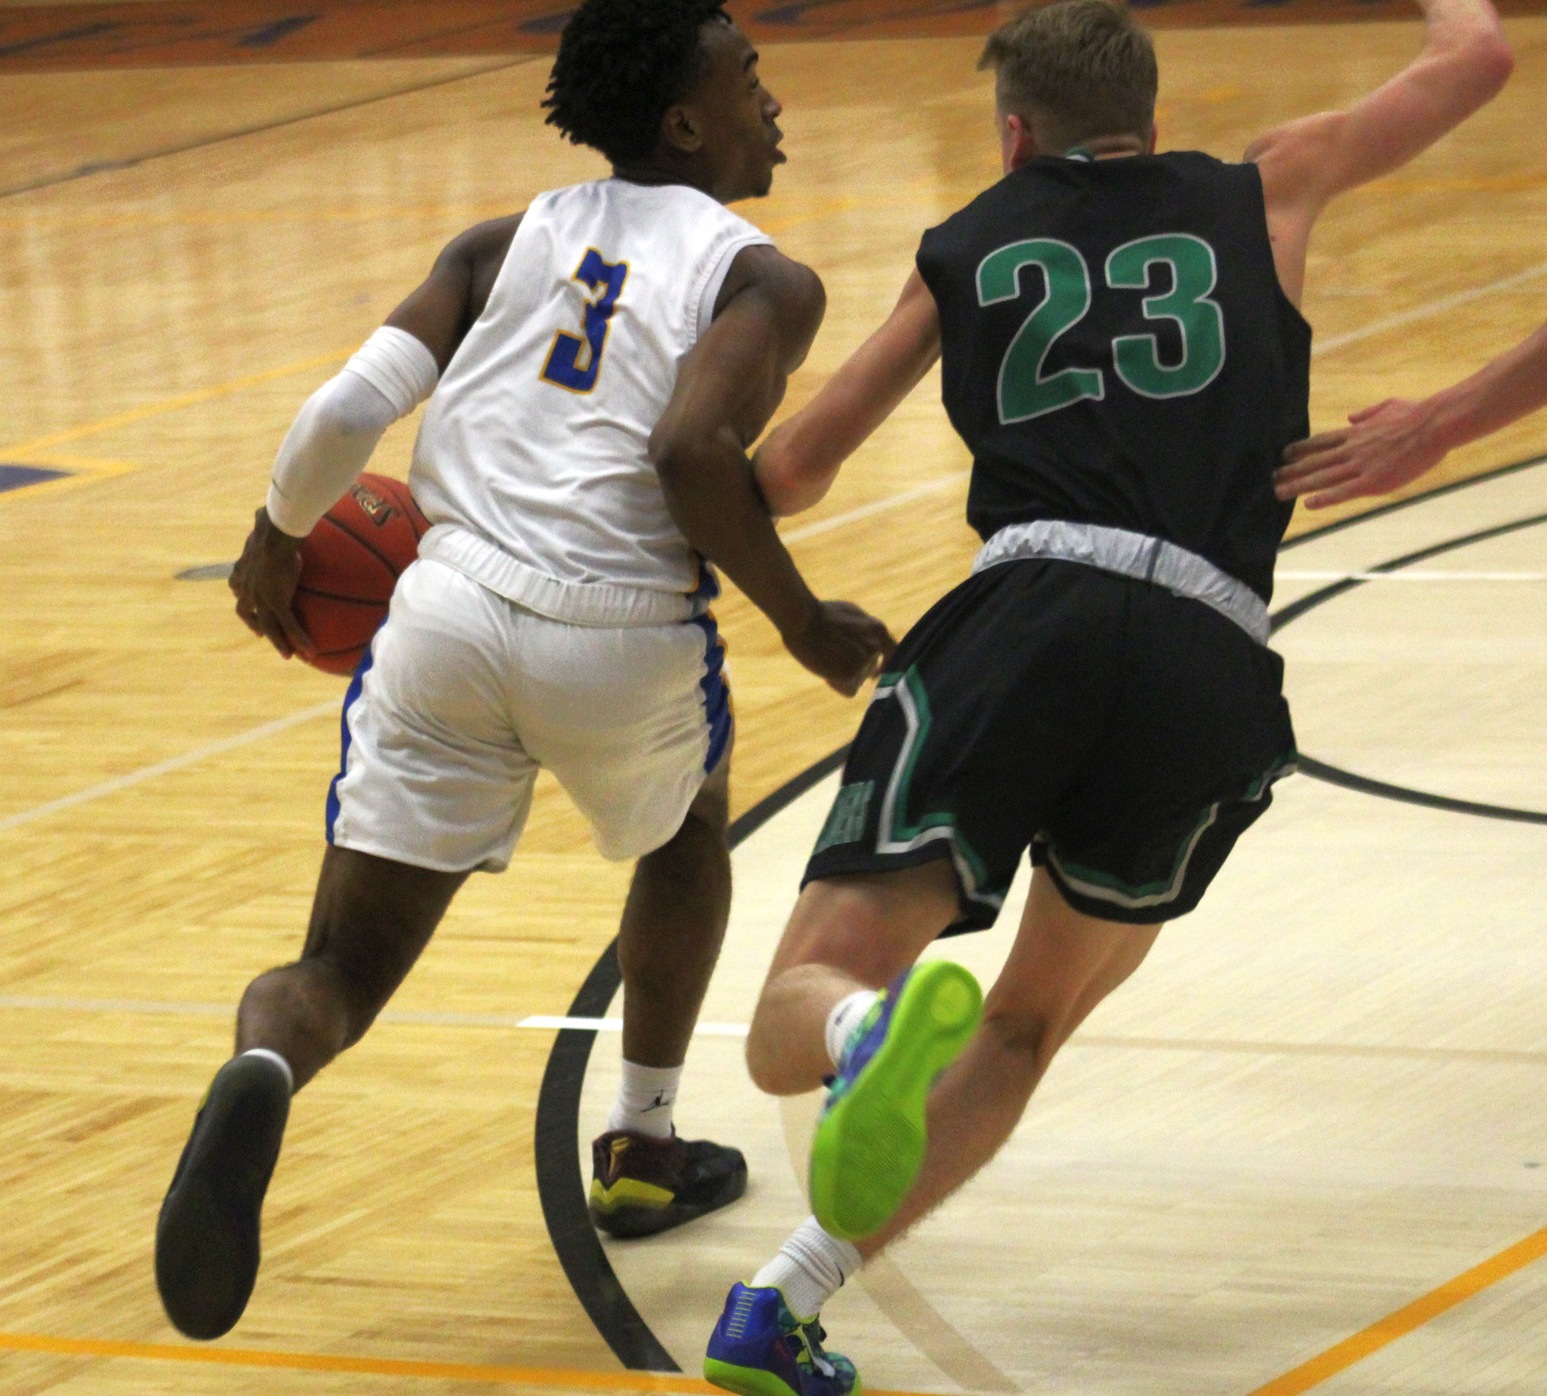 NIACC's McKelary Robertson drives to the basket in Sunday's win over Central CC-Columbus.